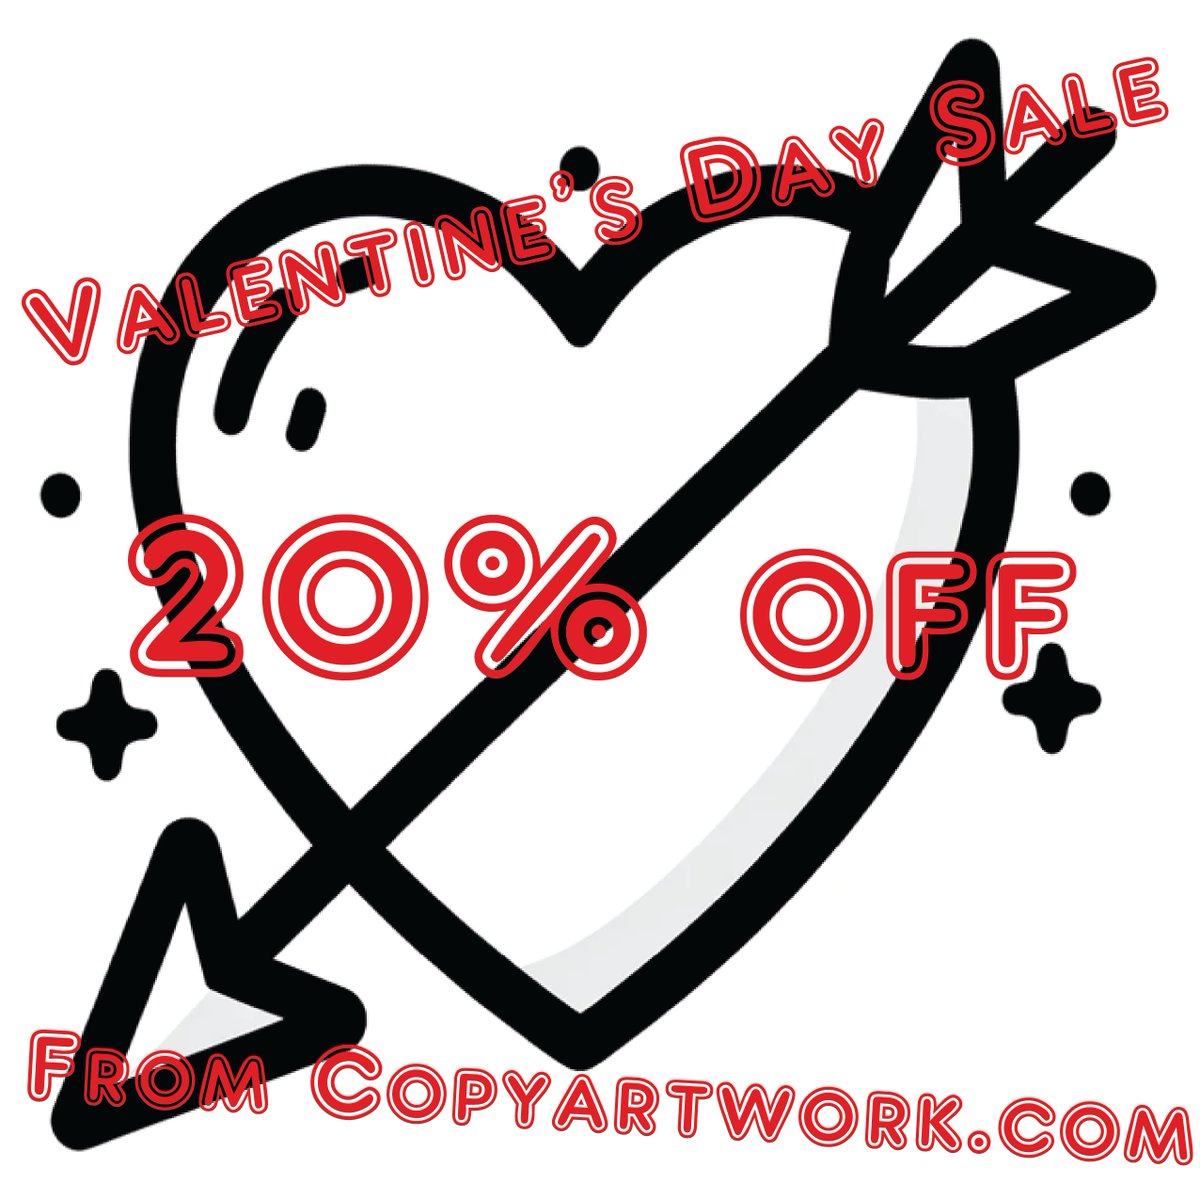 Happy Valentine's Day from Copyartwork.com! Just a reminder that this special promo code to get 20% off an order expires at the end of the week, in case you haven't used it yet: VDAY24 Much Love, Copyartwork.com #valentinesday2024 #discount #design #promocode